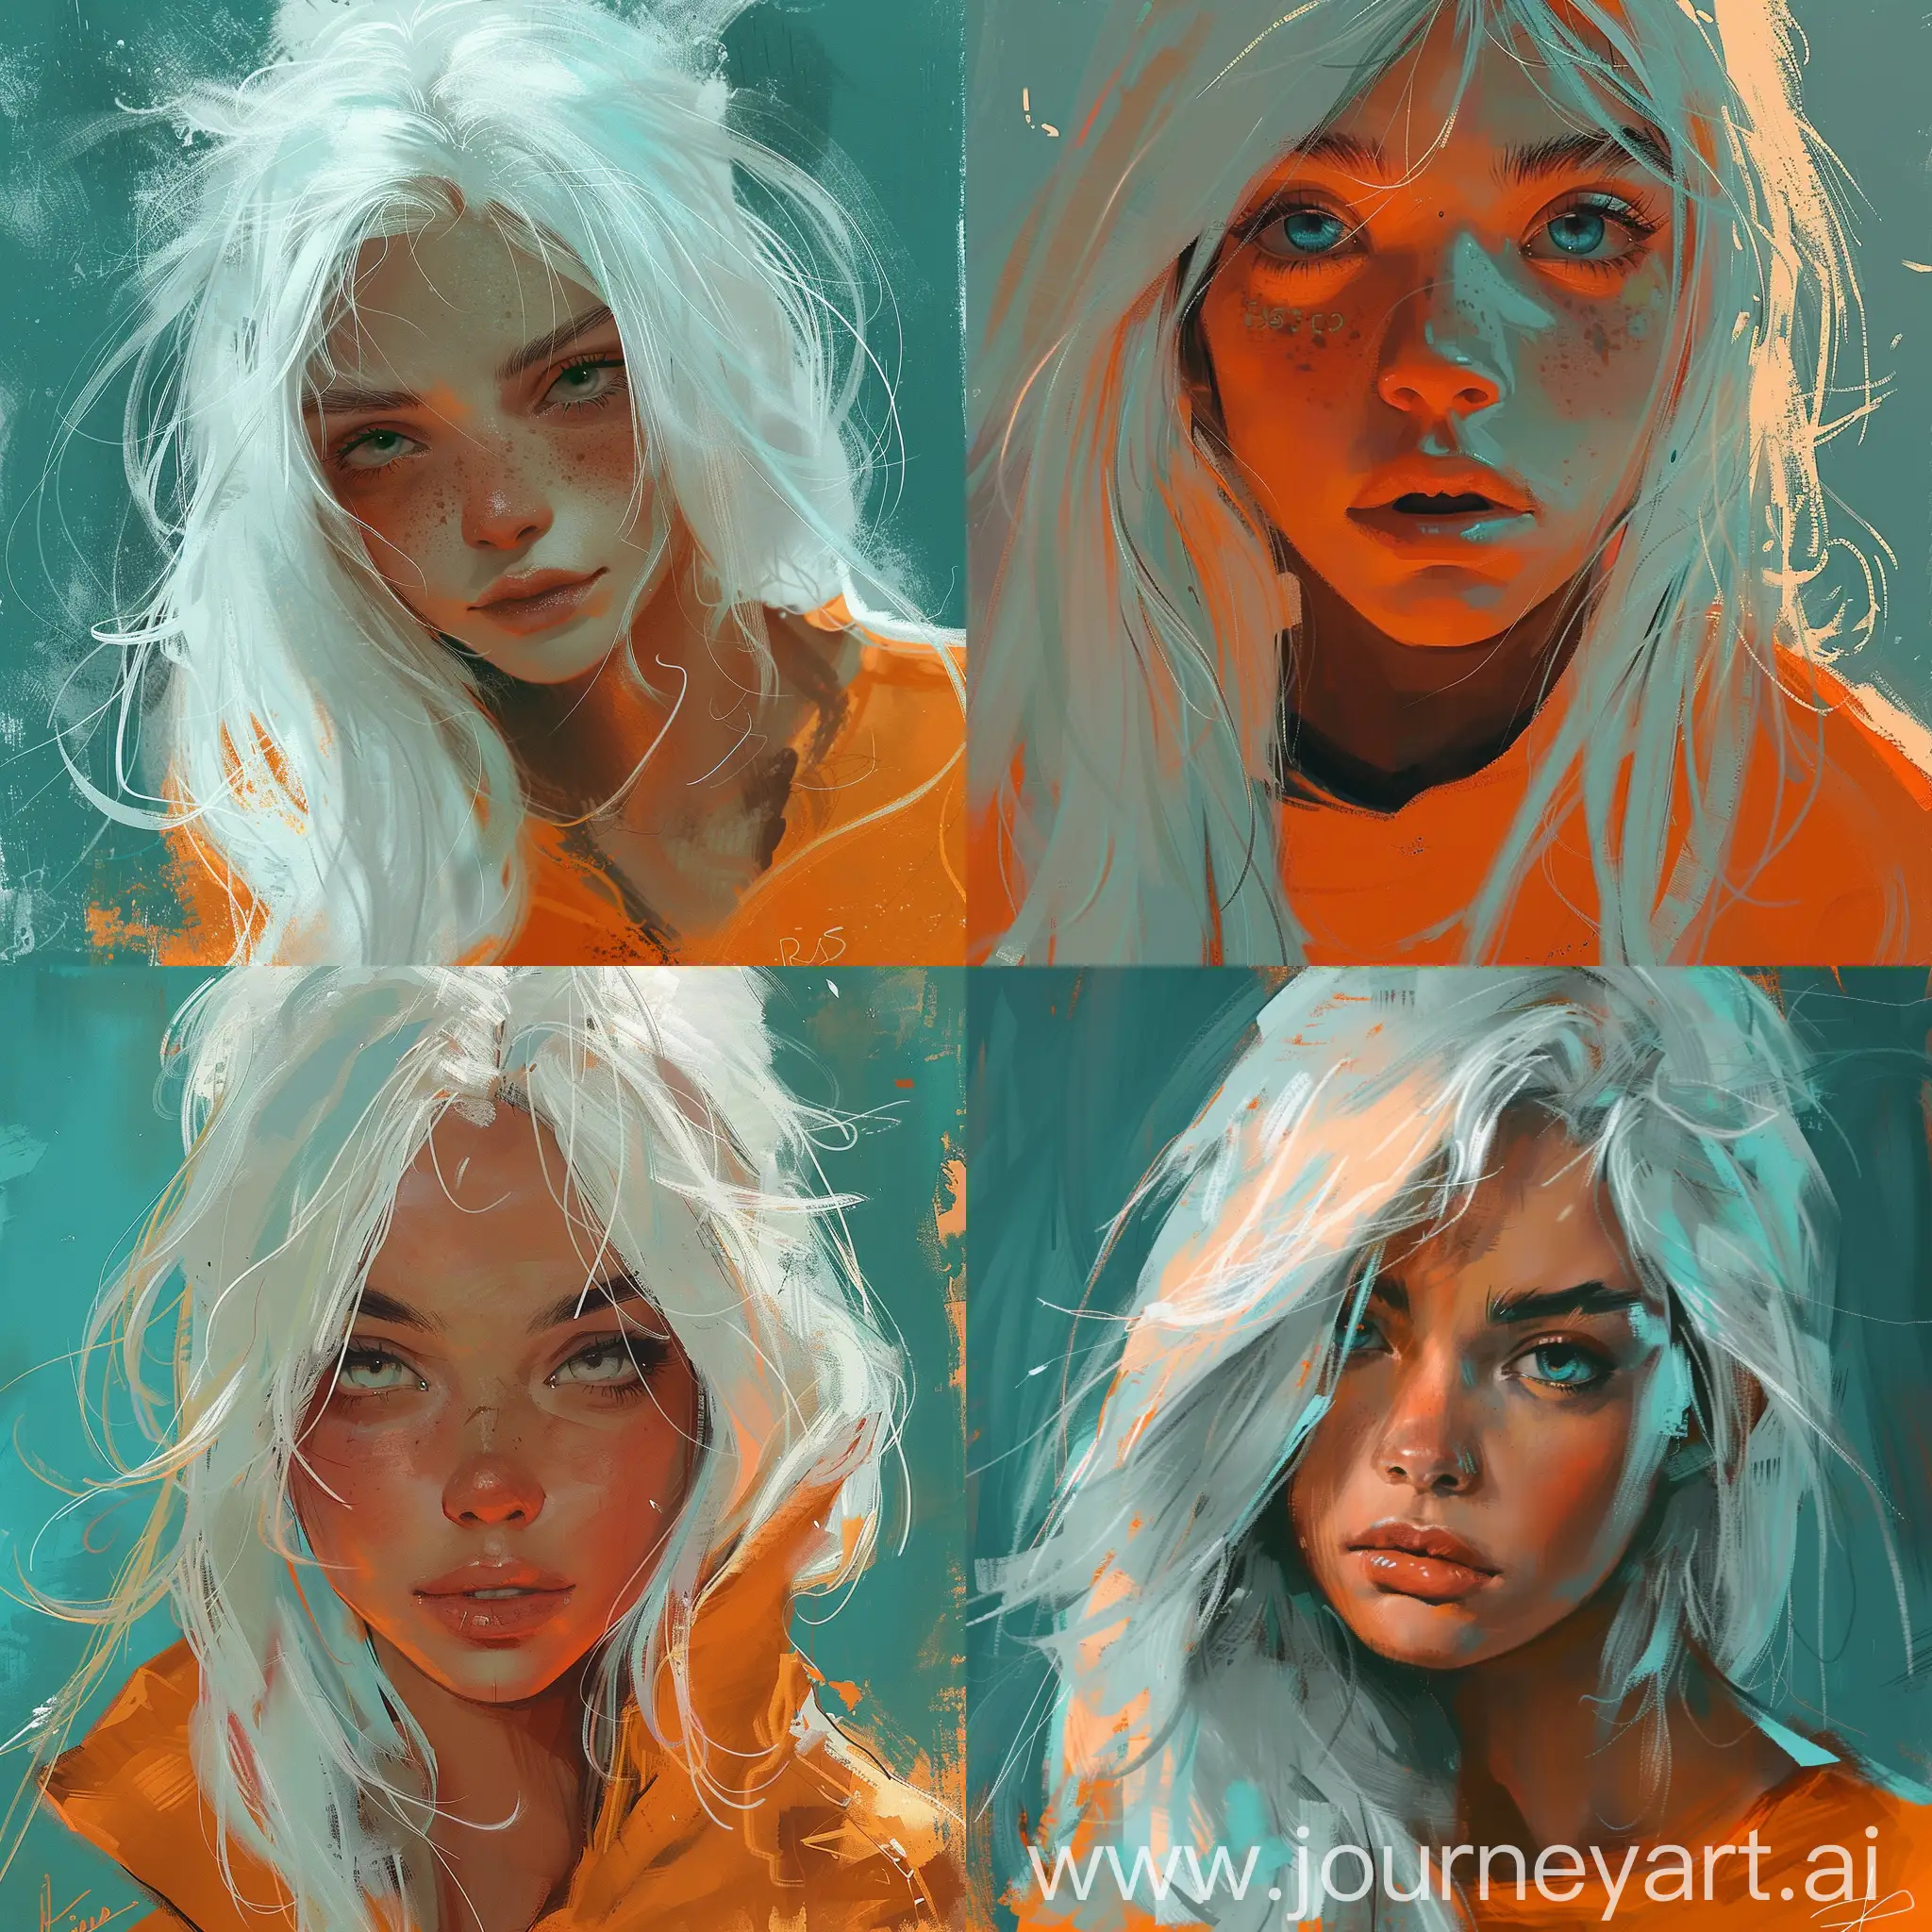 Ross-Tran-Style-Portrait-Girl-with-White-Hair-in-Teal-and-Orange